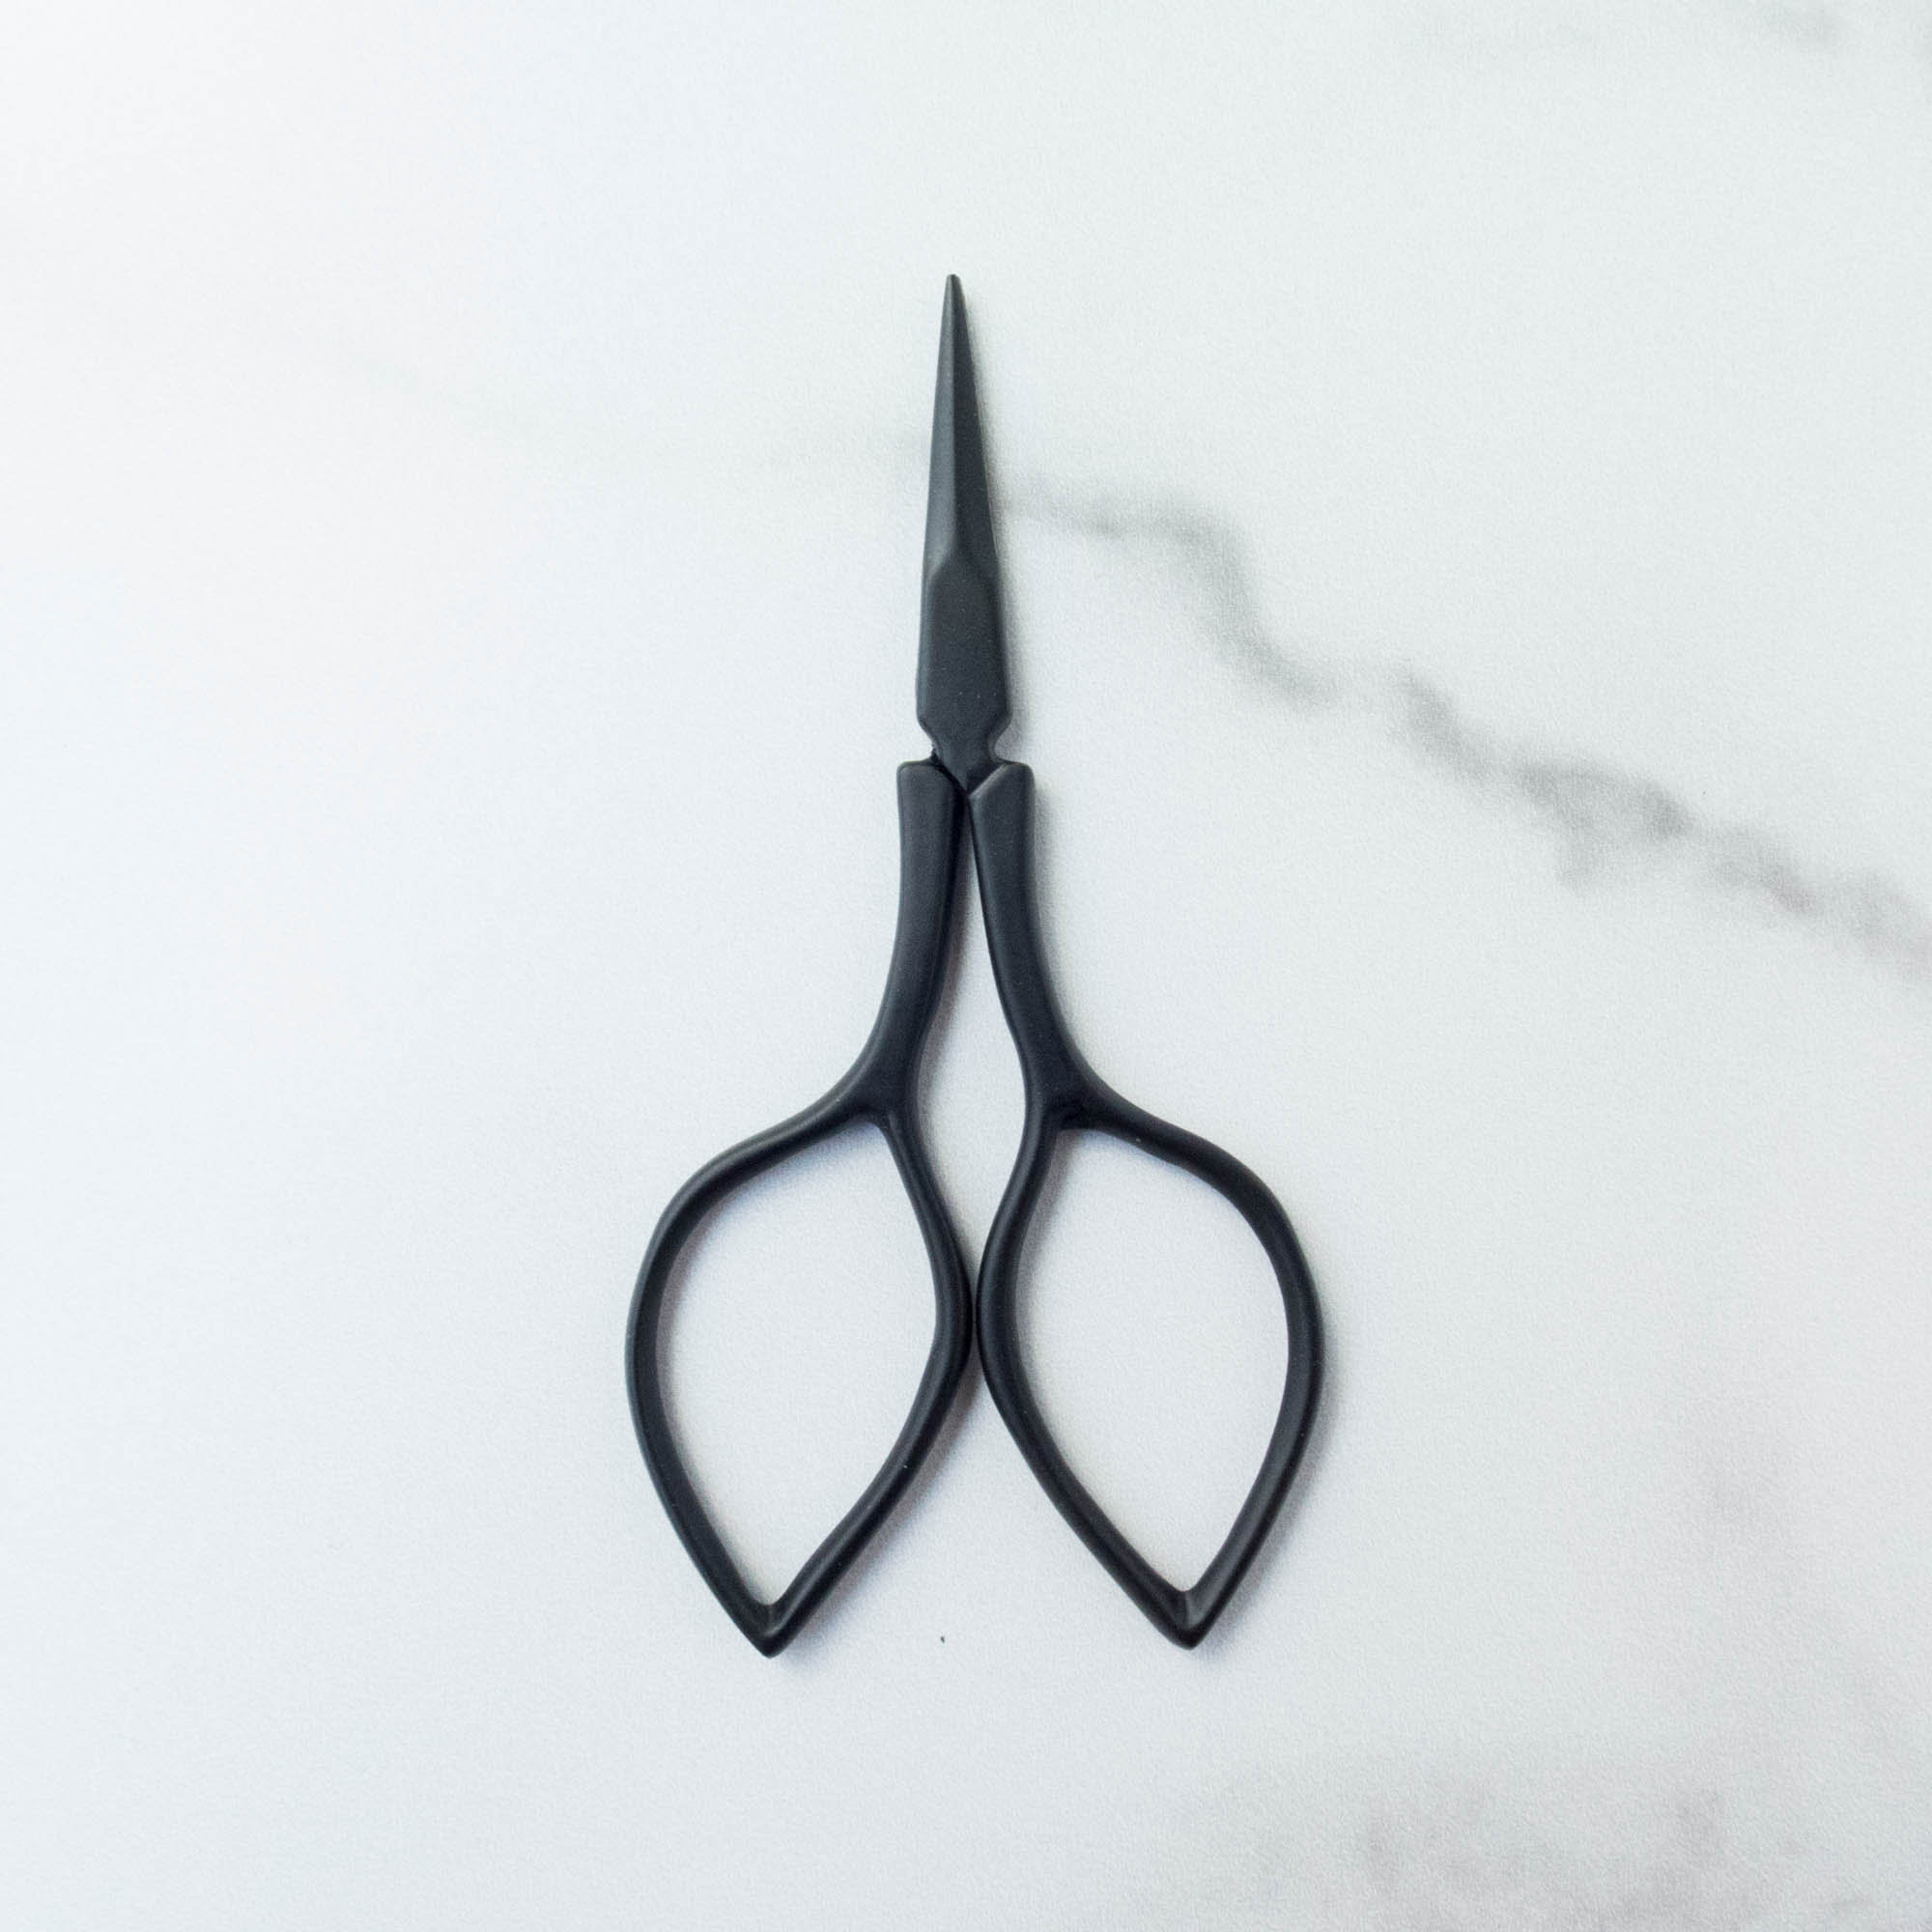 5 Inch Steel Scissors for Fabric Cutter Craft Tailor's Scissors Embroidery Sewing  Scissors Tool Cuts DIY Craft Scrapbooking Tool Paper 